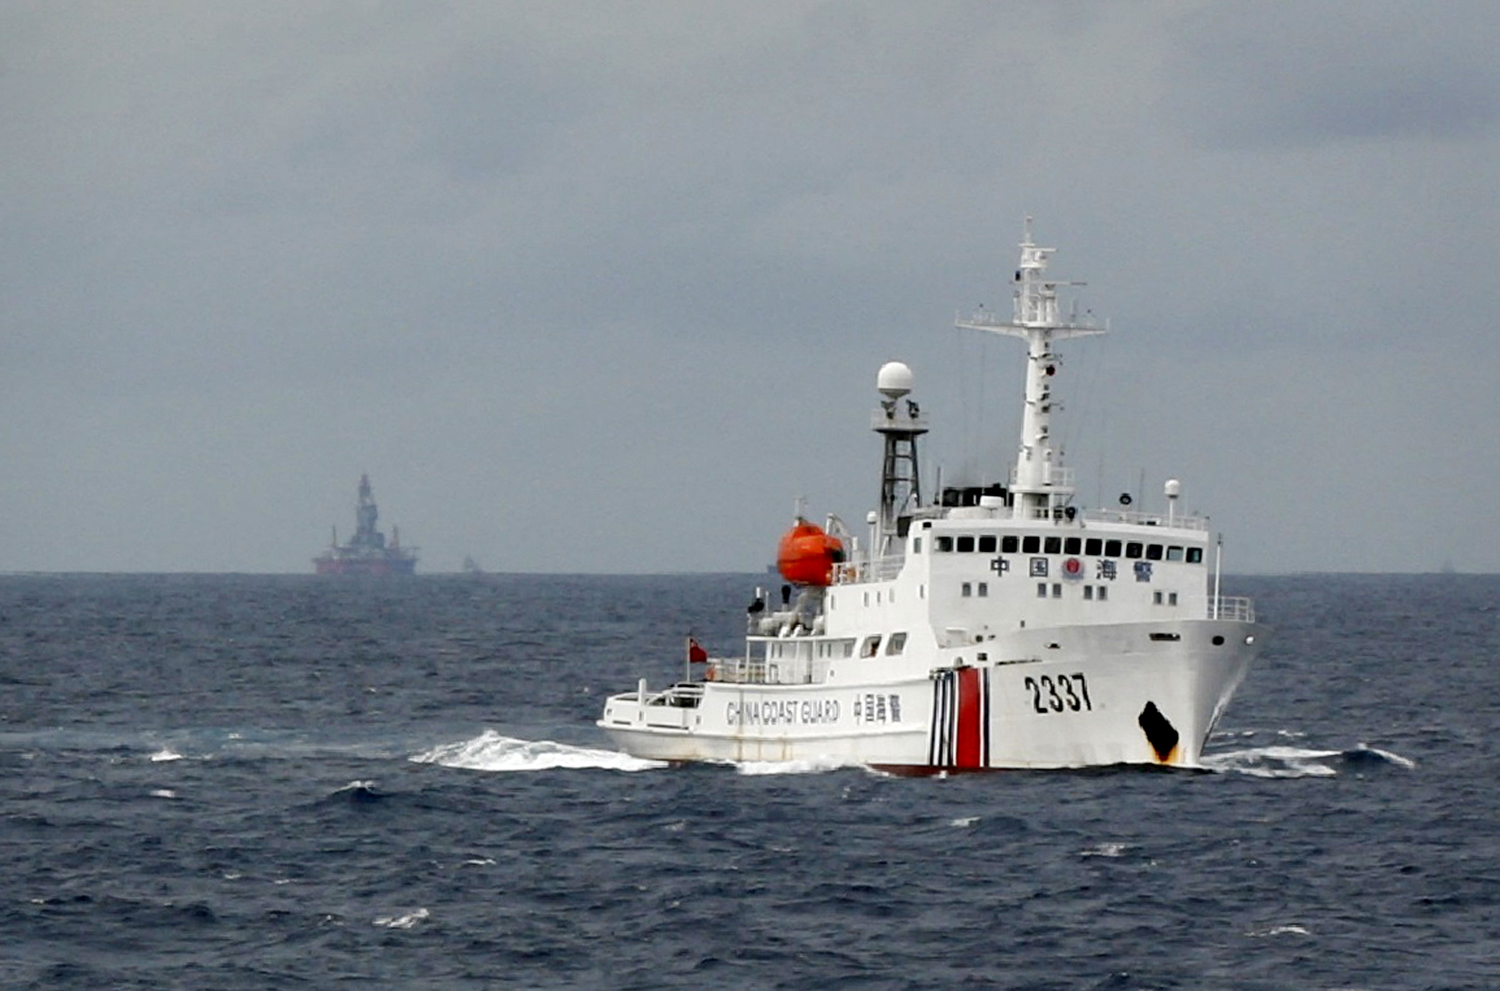 Chinese Coast Guard vessel passes near the Chinese oil rig Haiyang Shi You 981 in the South China Sea